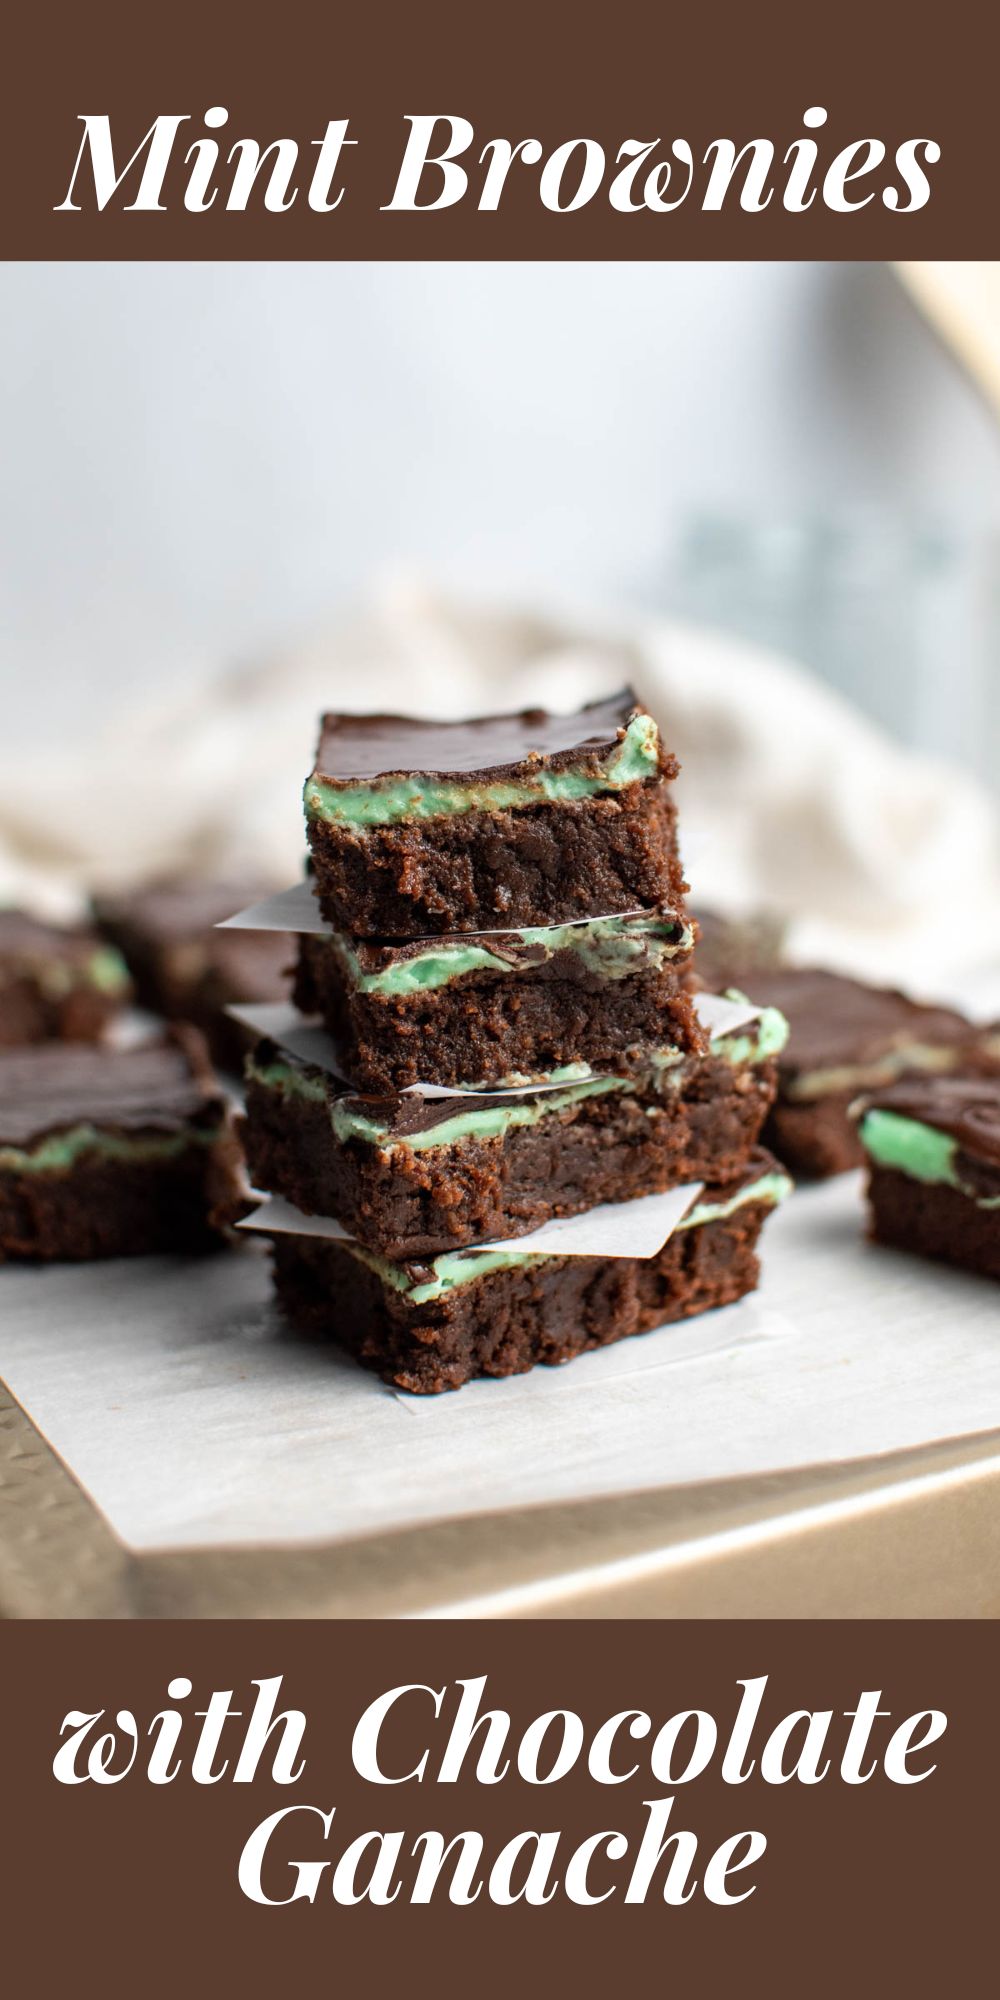 Pinterest graphic with text and photo of mint brownies stacked on top of each other.